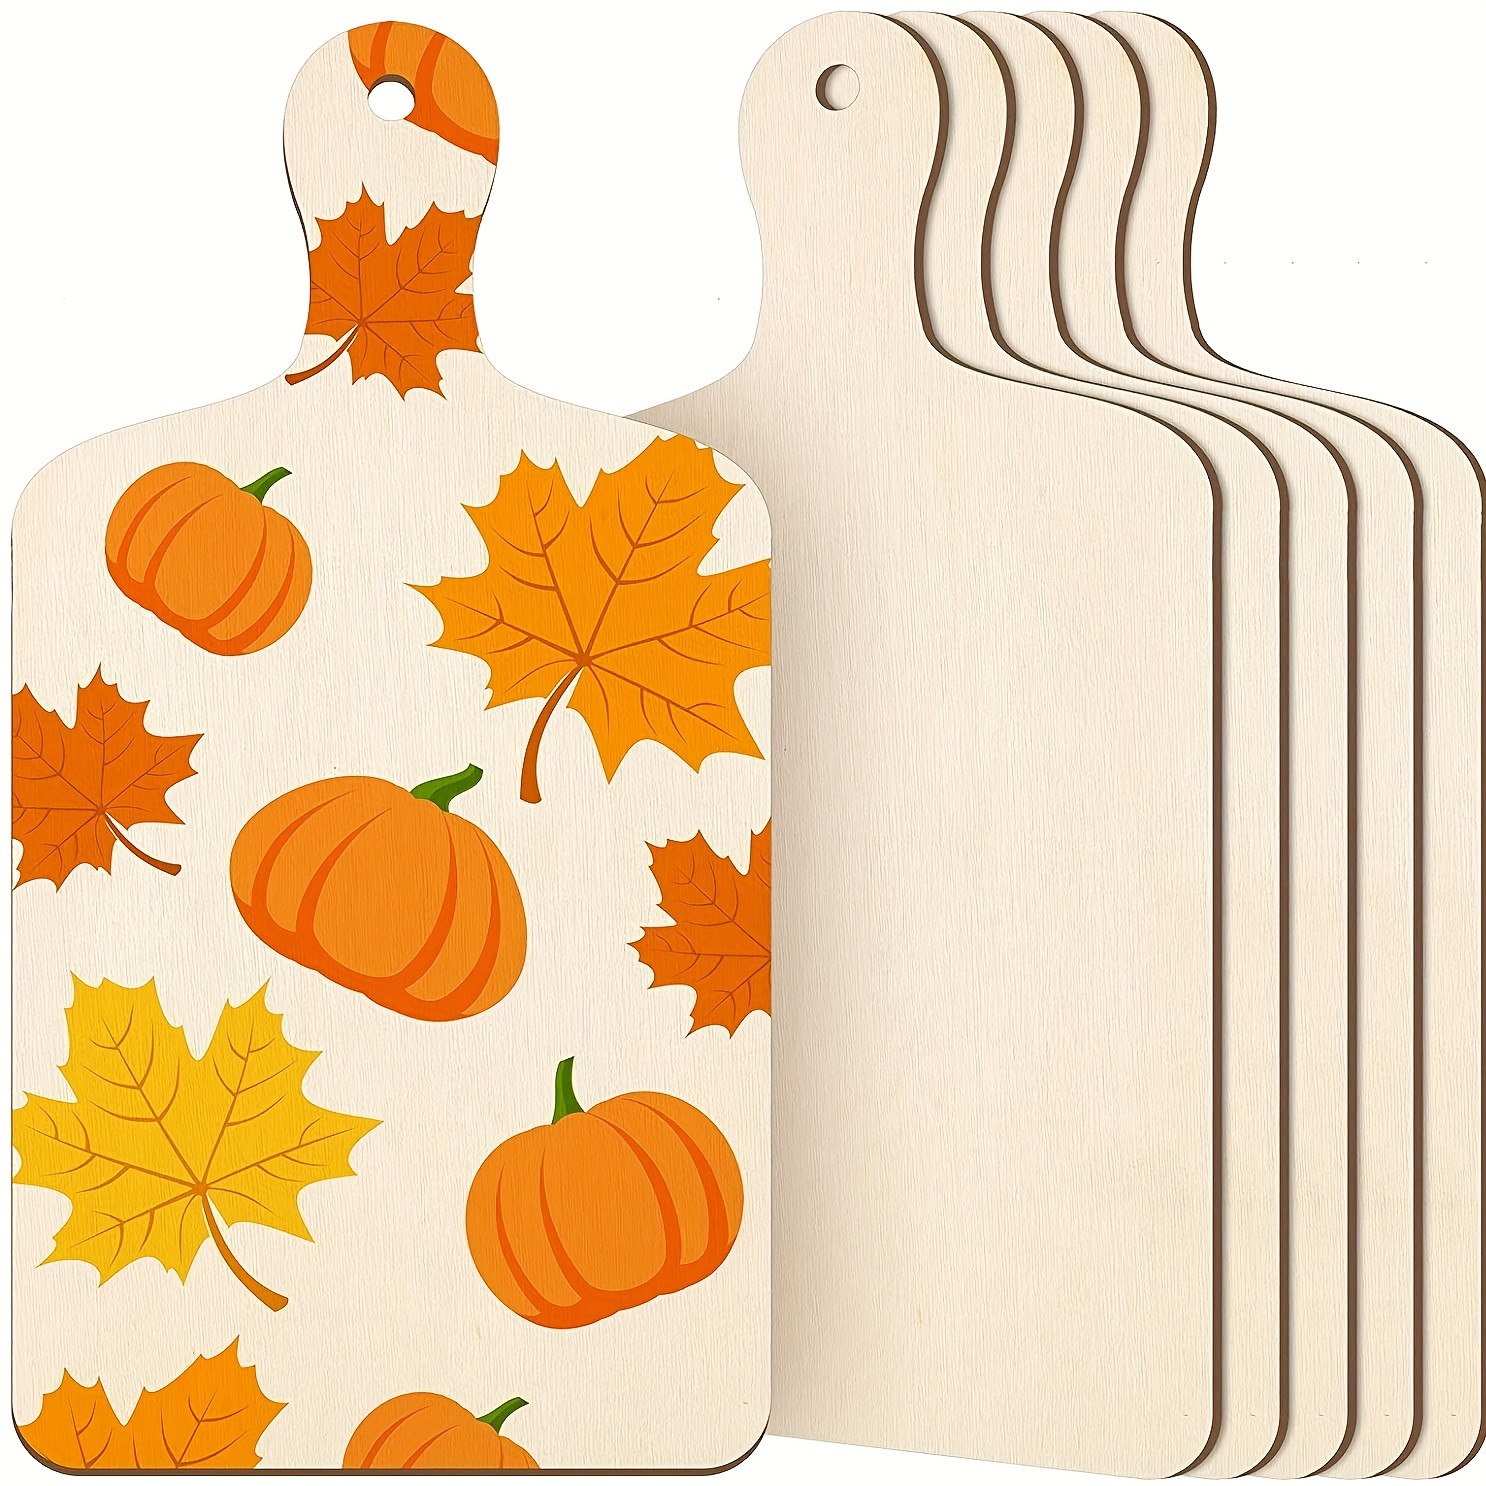 6Pcs Paddle Cutting Board with Handle Cheese Board Serving Board Wood